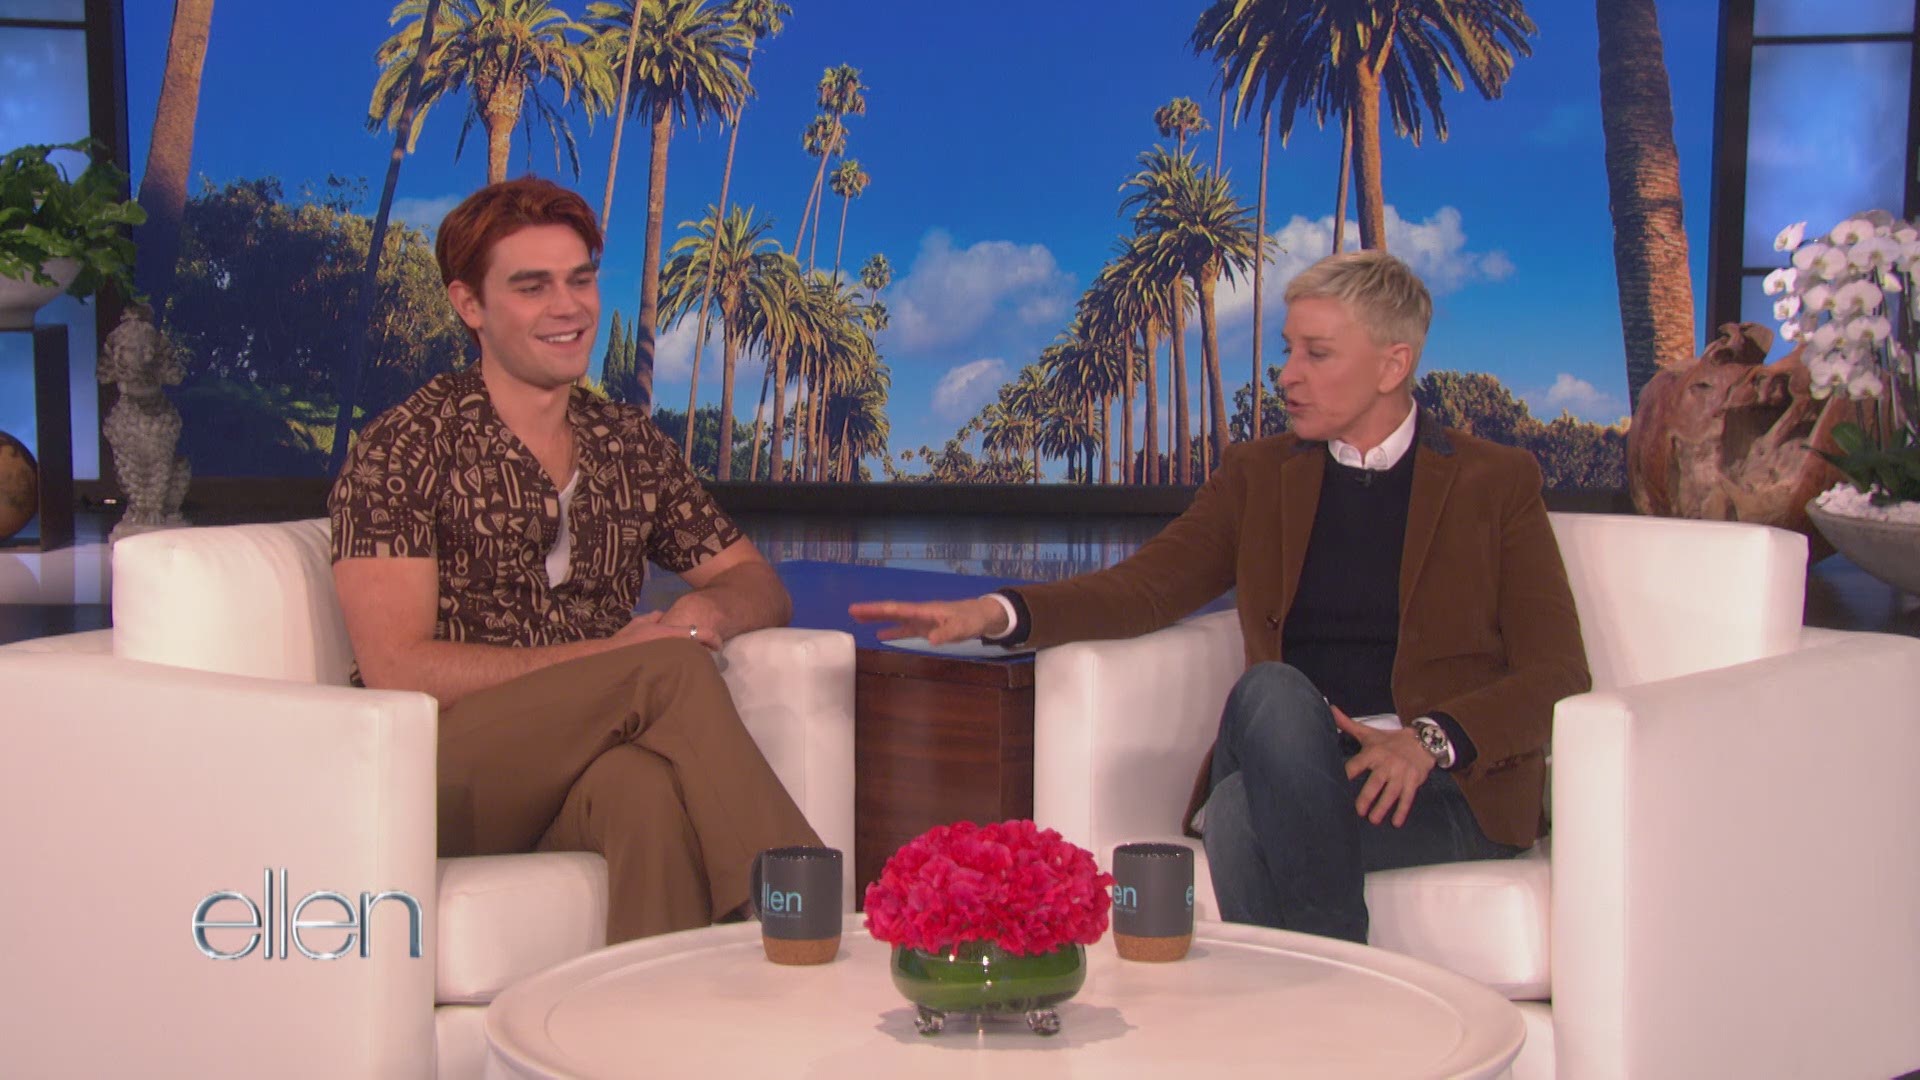 Star of “Riverdale” KJ Apa stops by the show